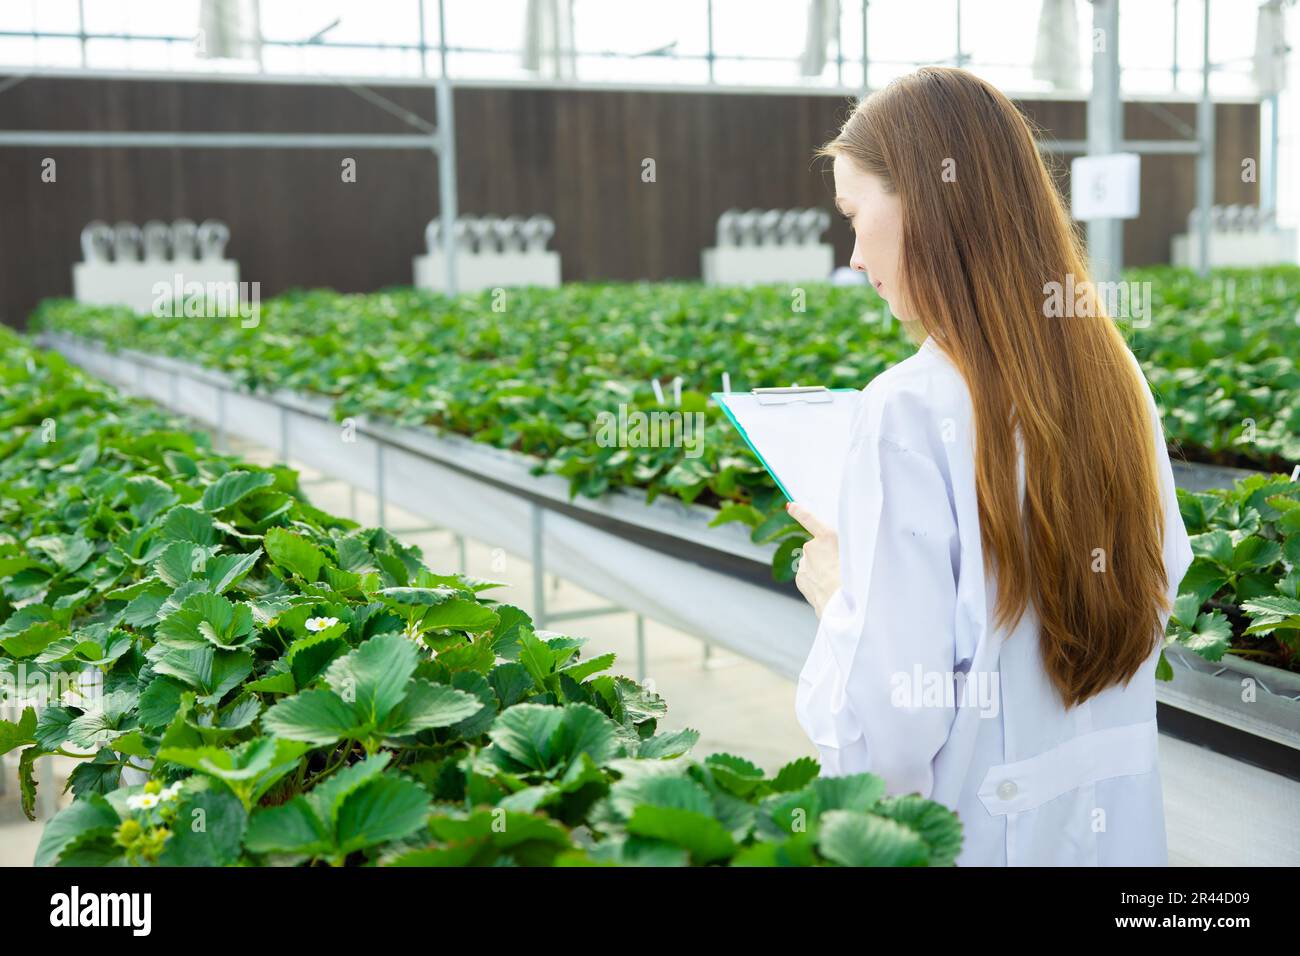 Scientist working collect data record tracking plant grow data for agriculture farm research science education Stock Photo